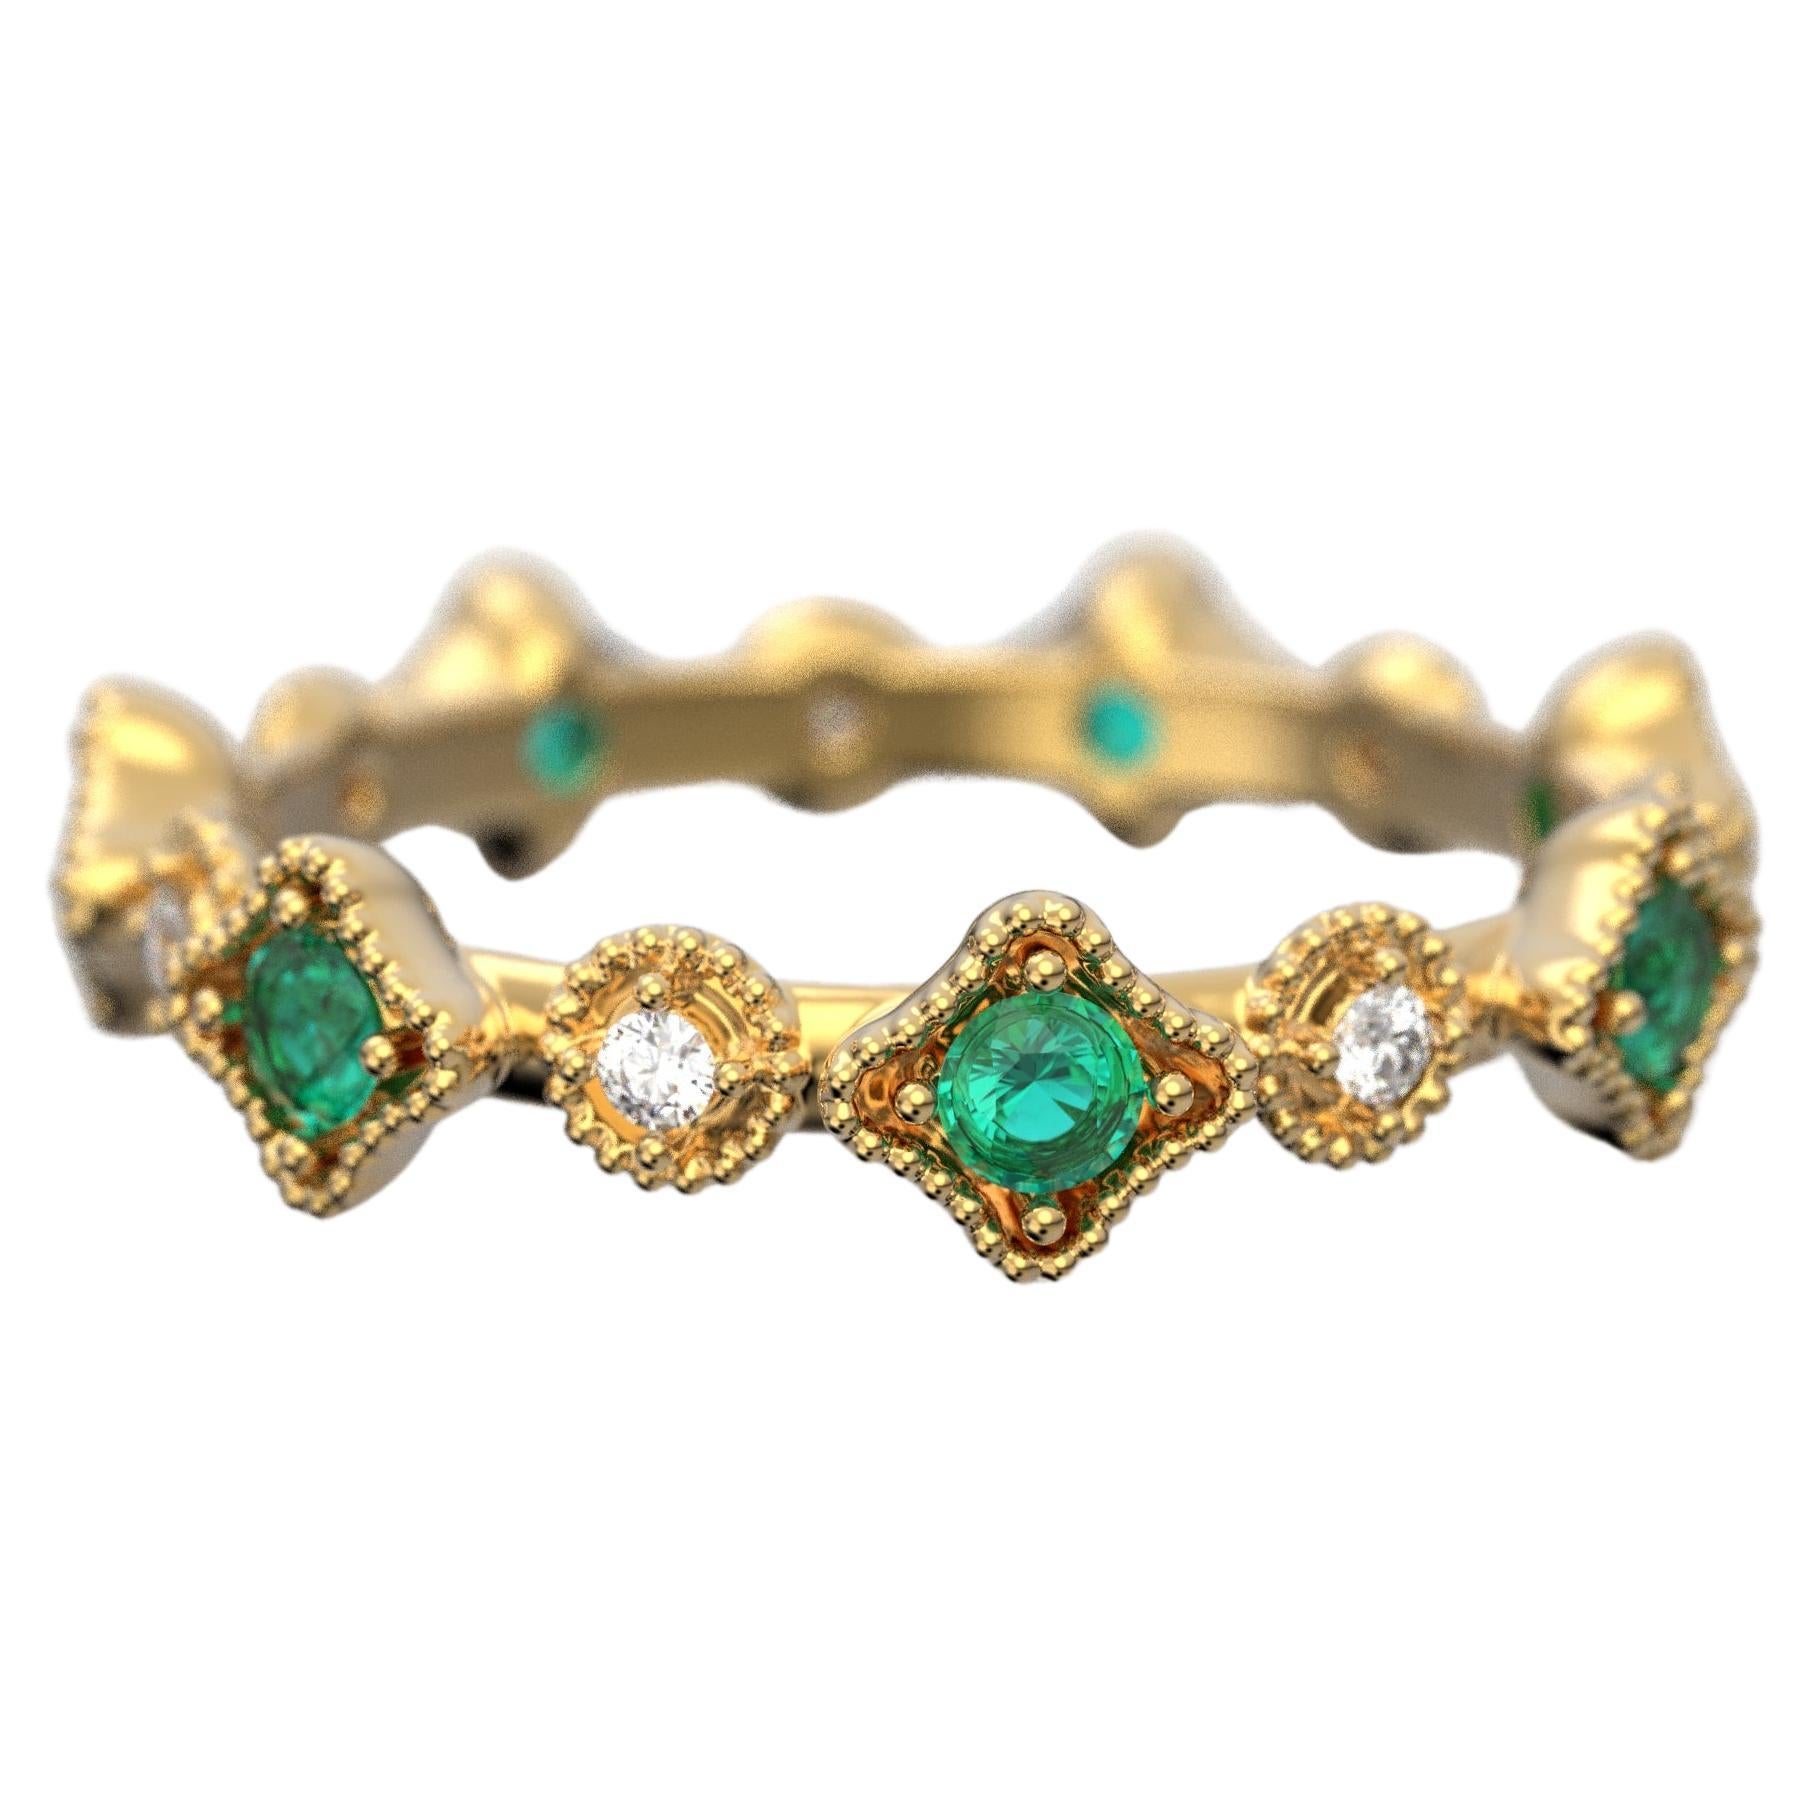 For Sale:  18k Gold Eternity Band with Natural Emerald and Diamonds, Made in Italy Jewelry